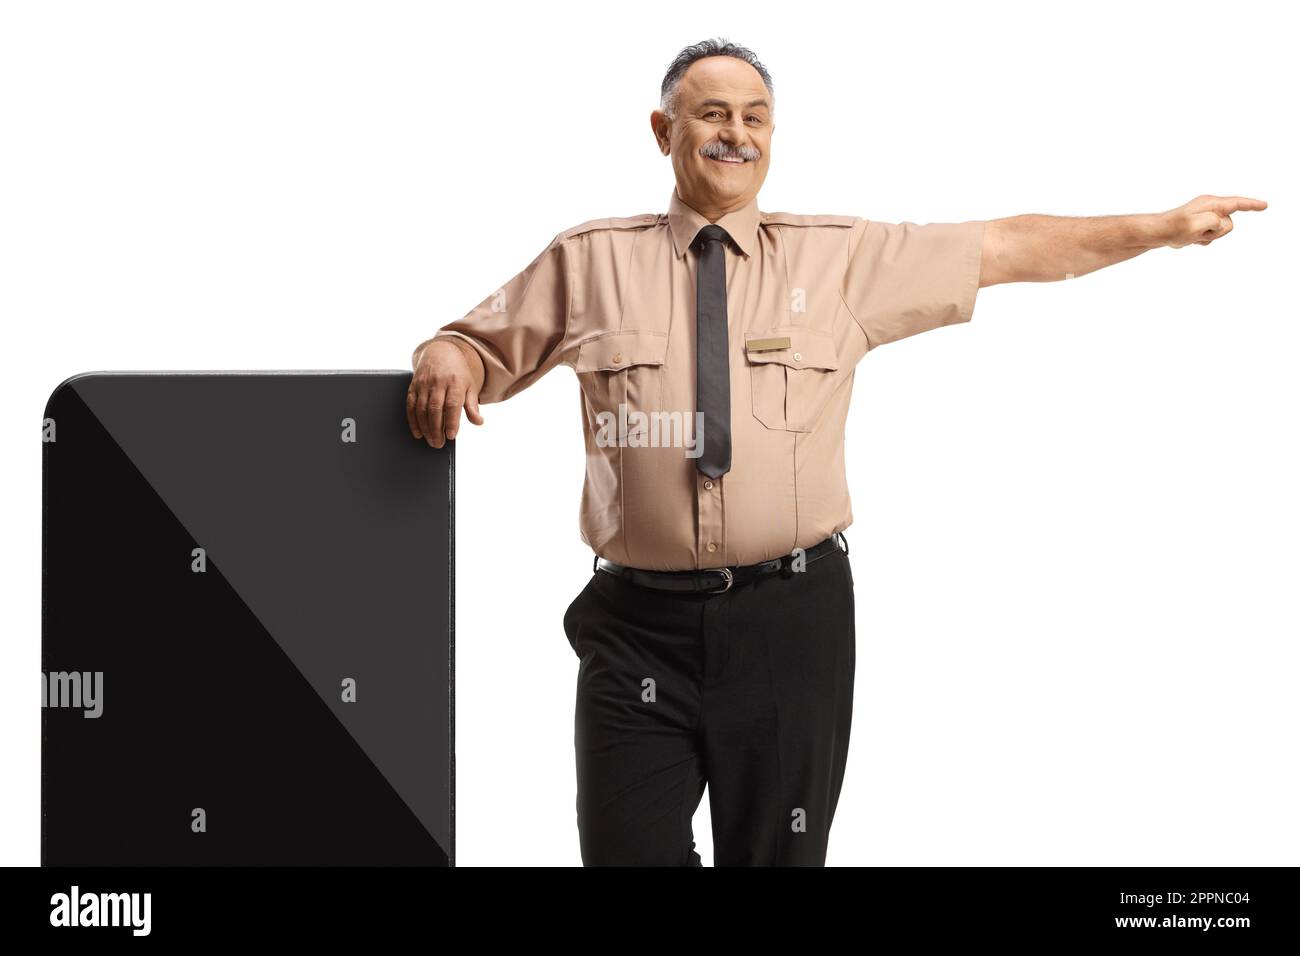 Security guard leaning on a big mobile phone and pointing to the side isolated on white background Stock Photo